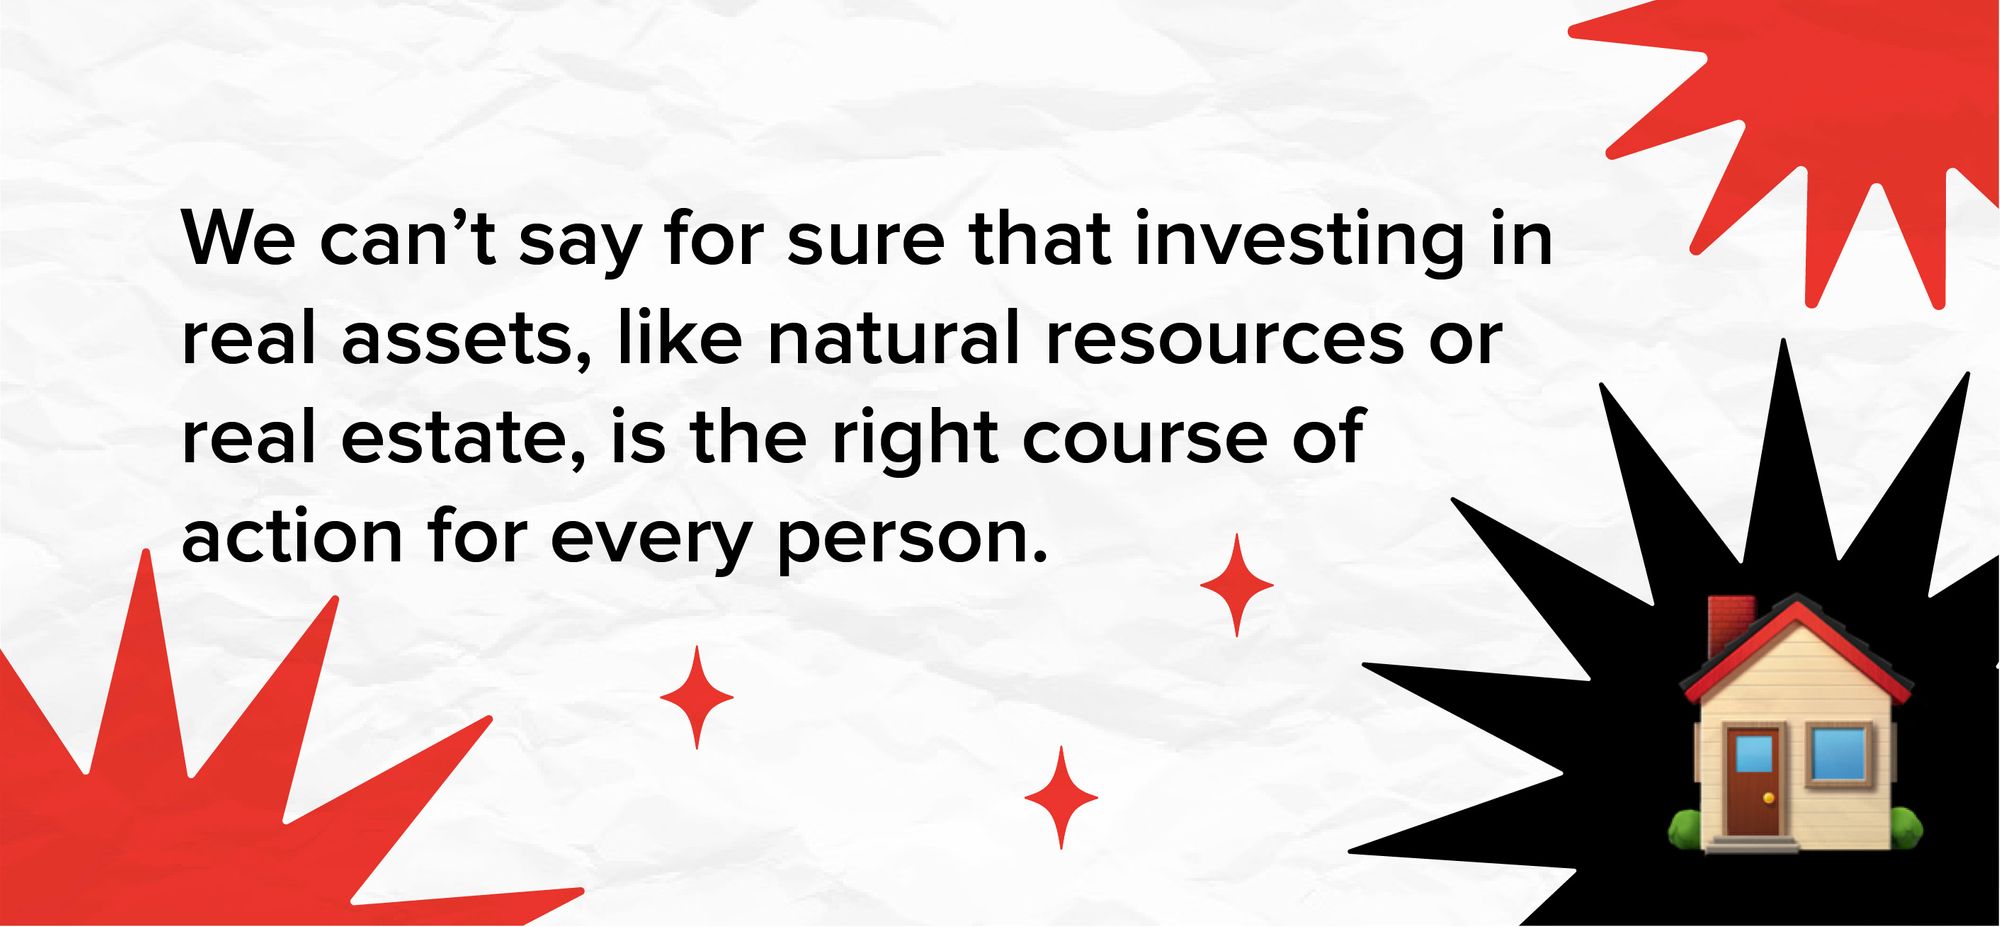 We can’t say for sure that investing in real assets, like natural resources or real estate, is the right course of action for every person.